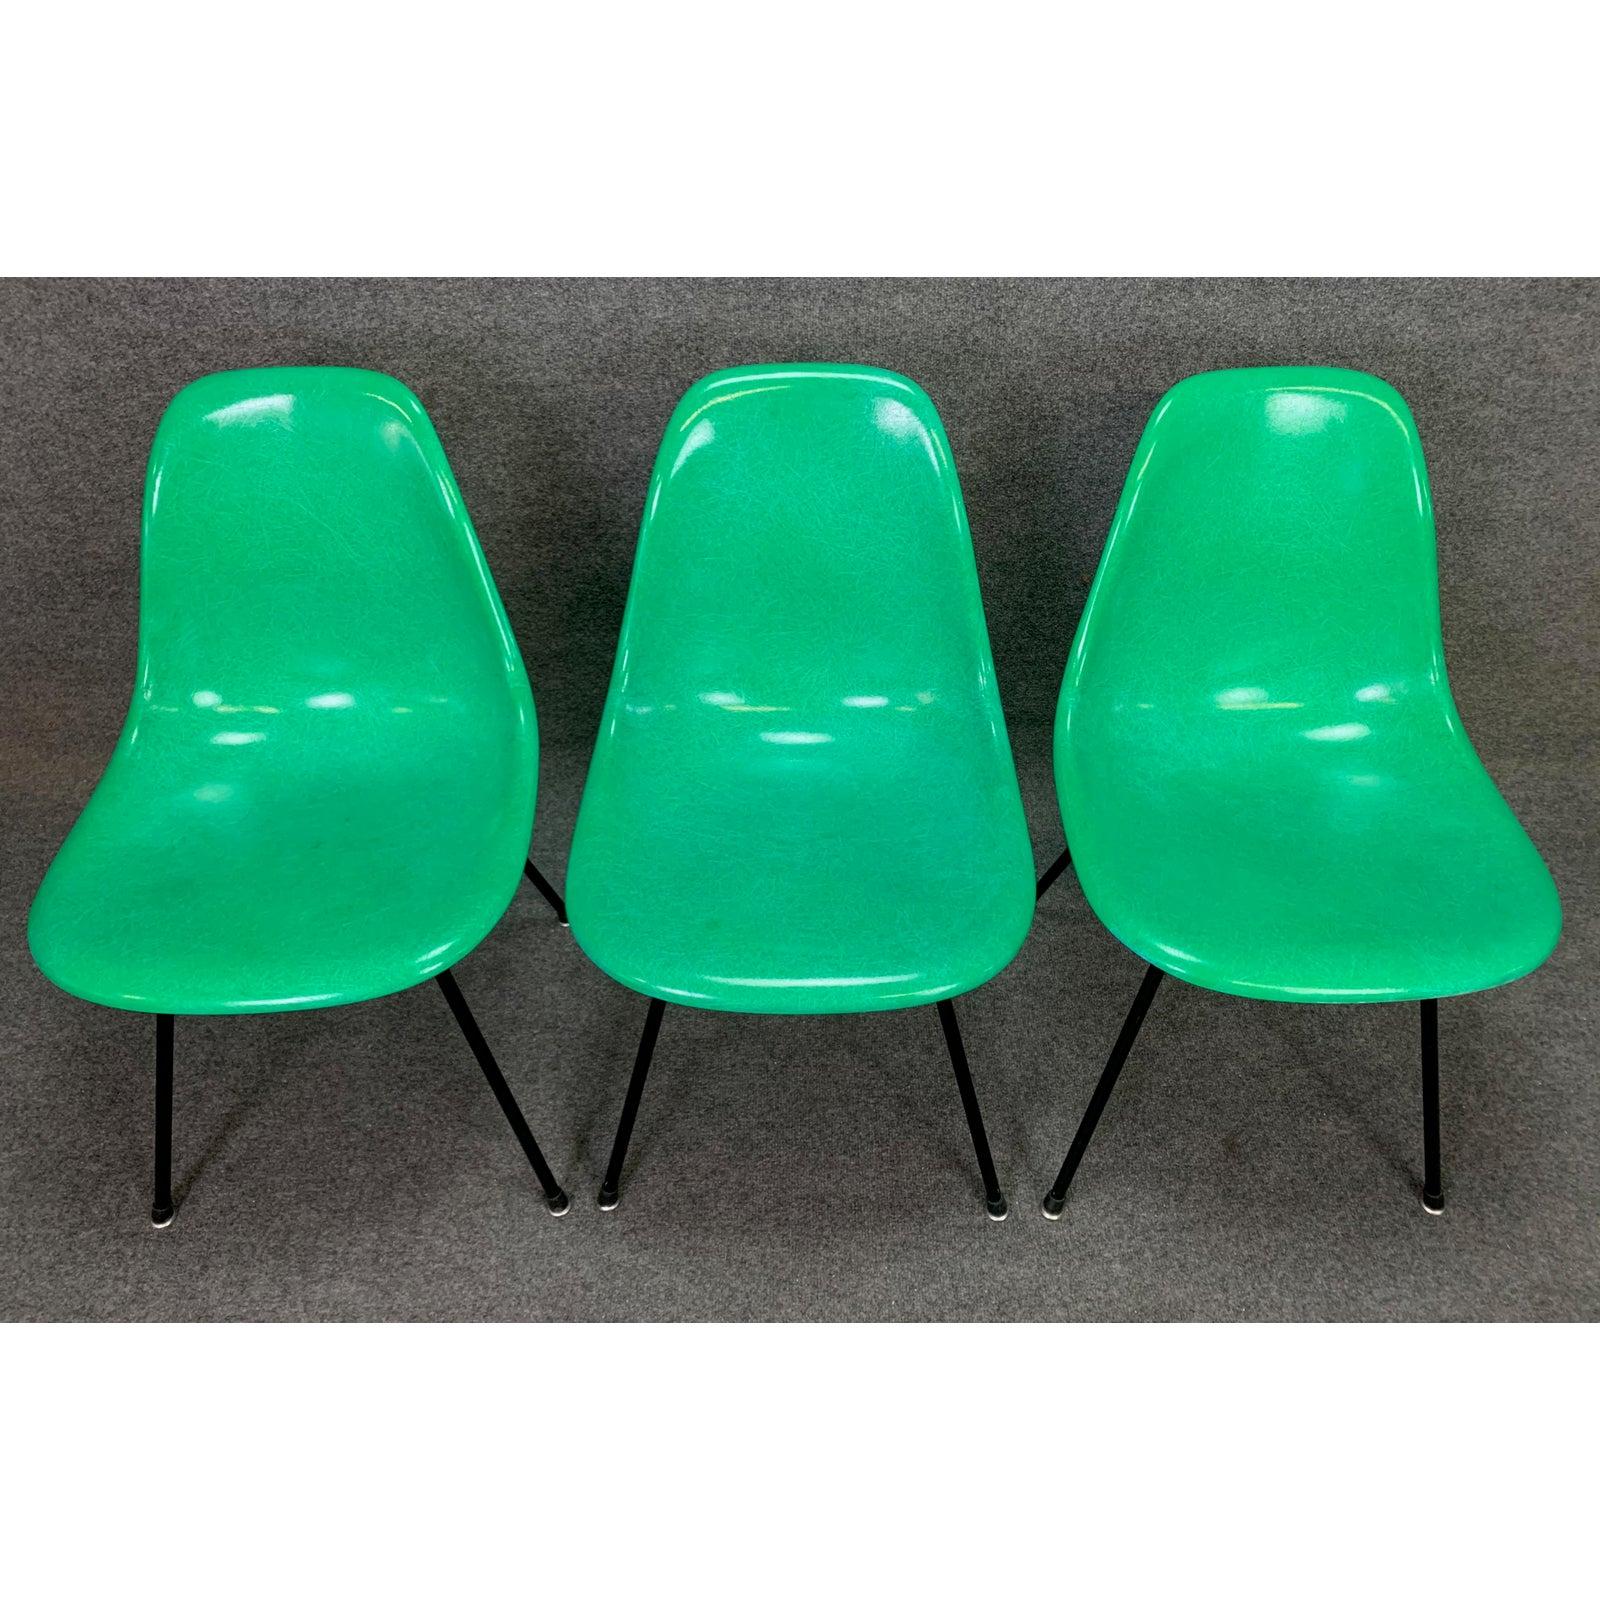 American Set of 6 Midcentury DSX Fiberglass Chairs by Charles Eames for Herman Miller